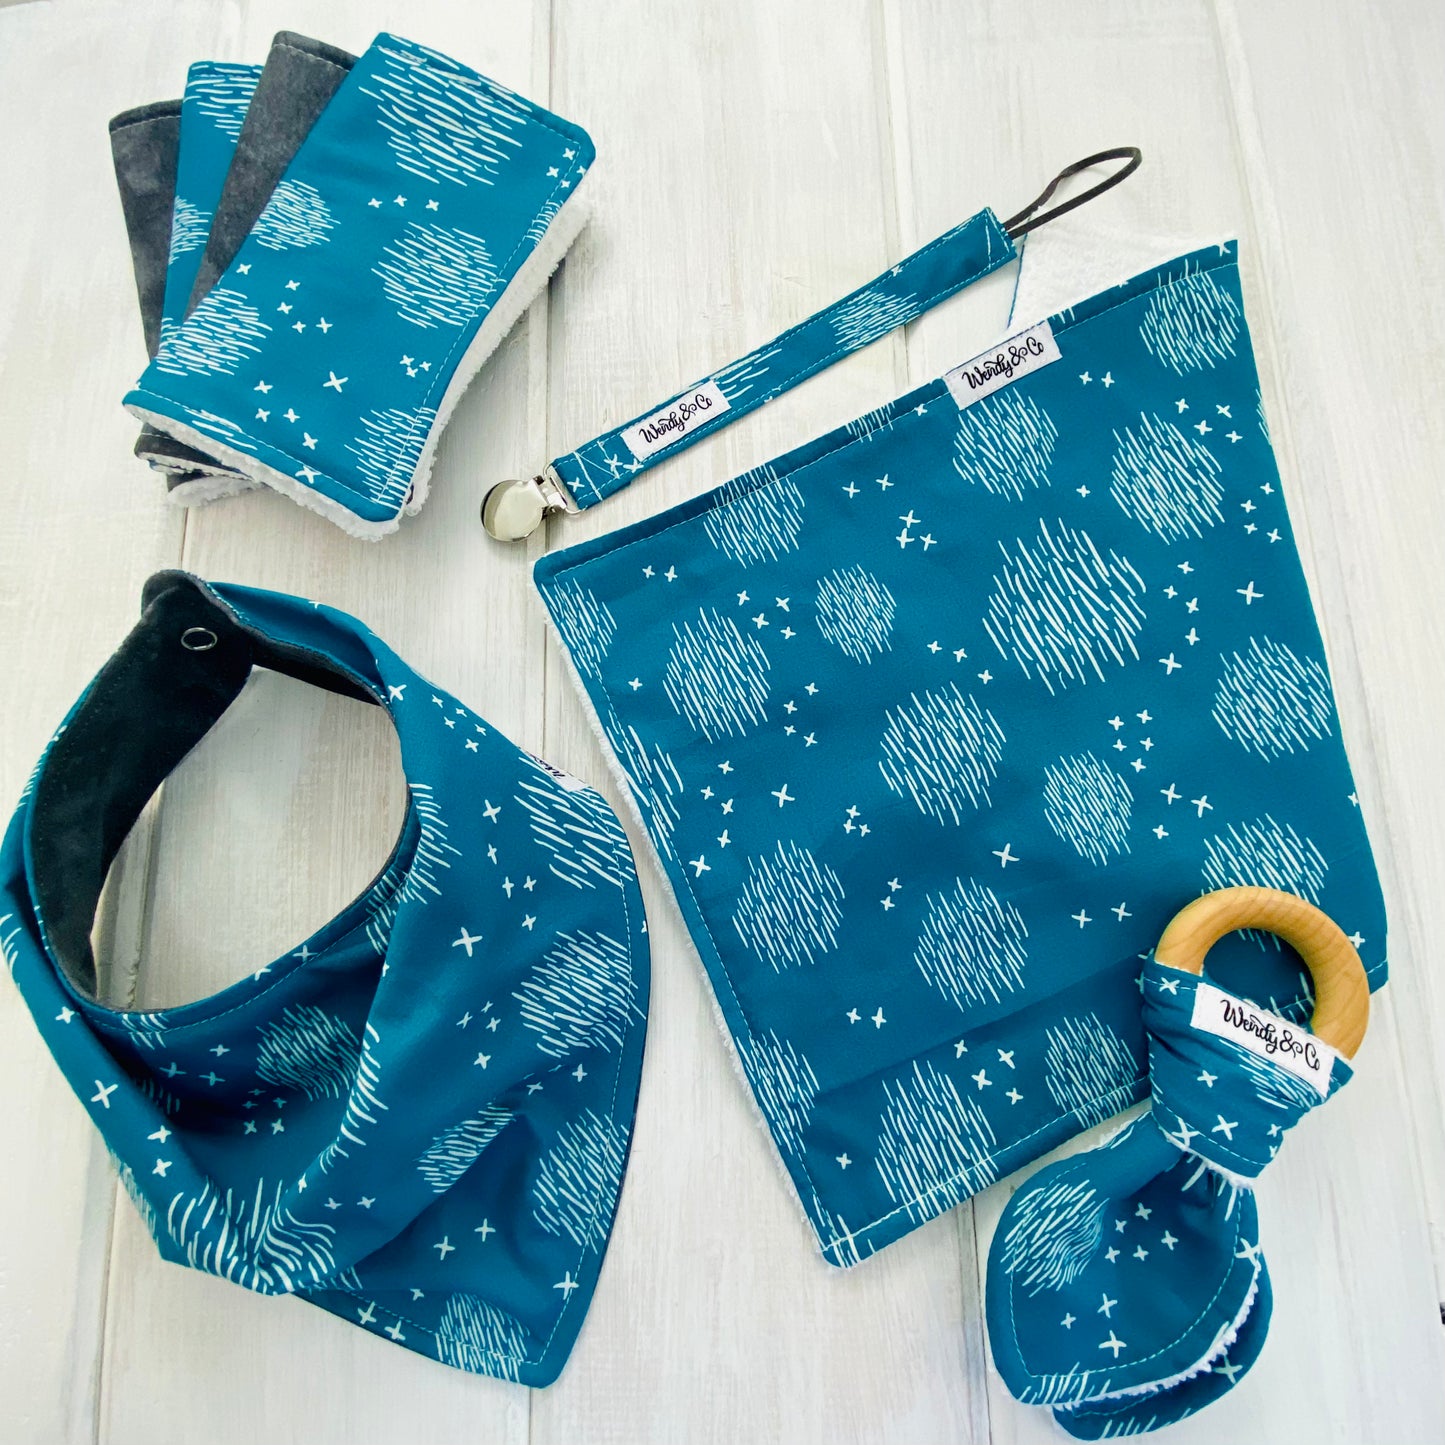 Modern neutral baby accessories in teal blue.